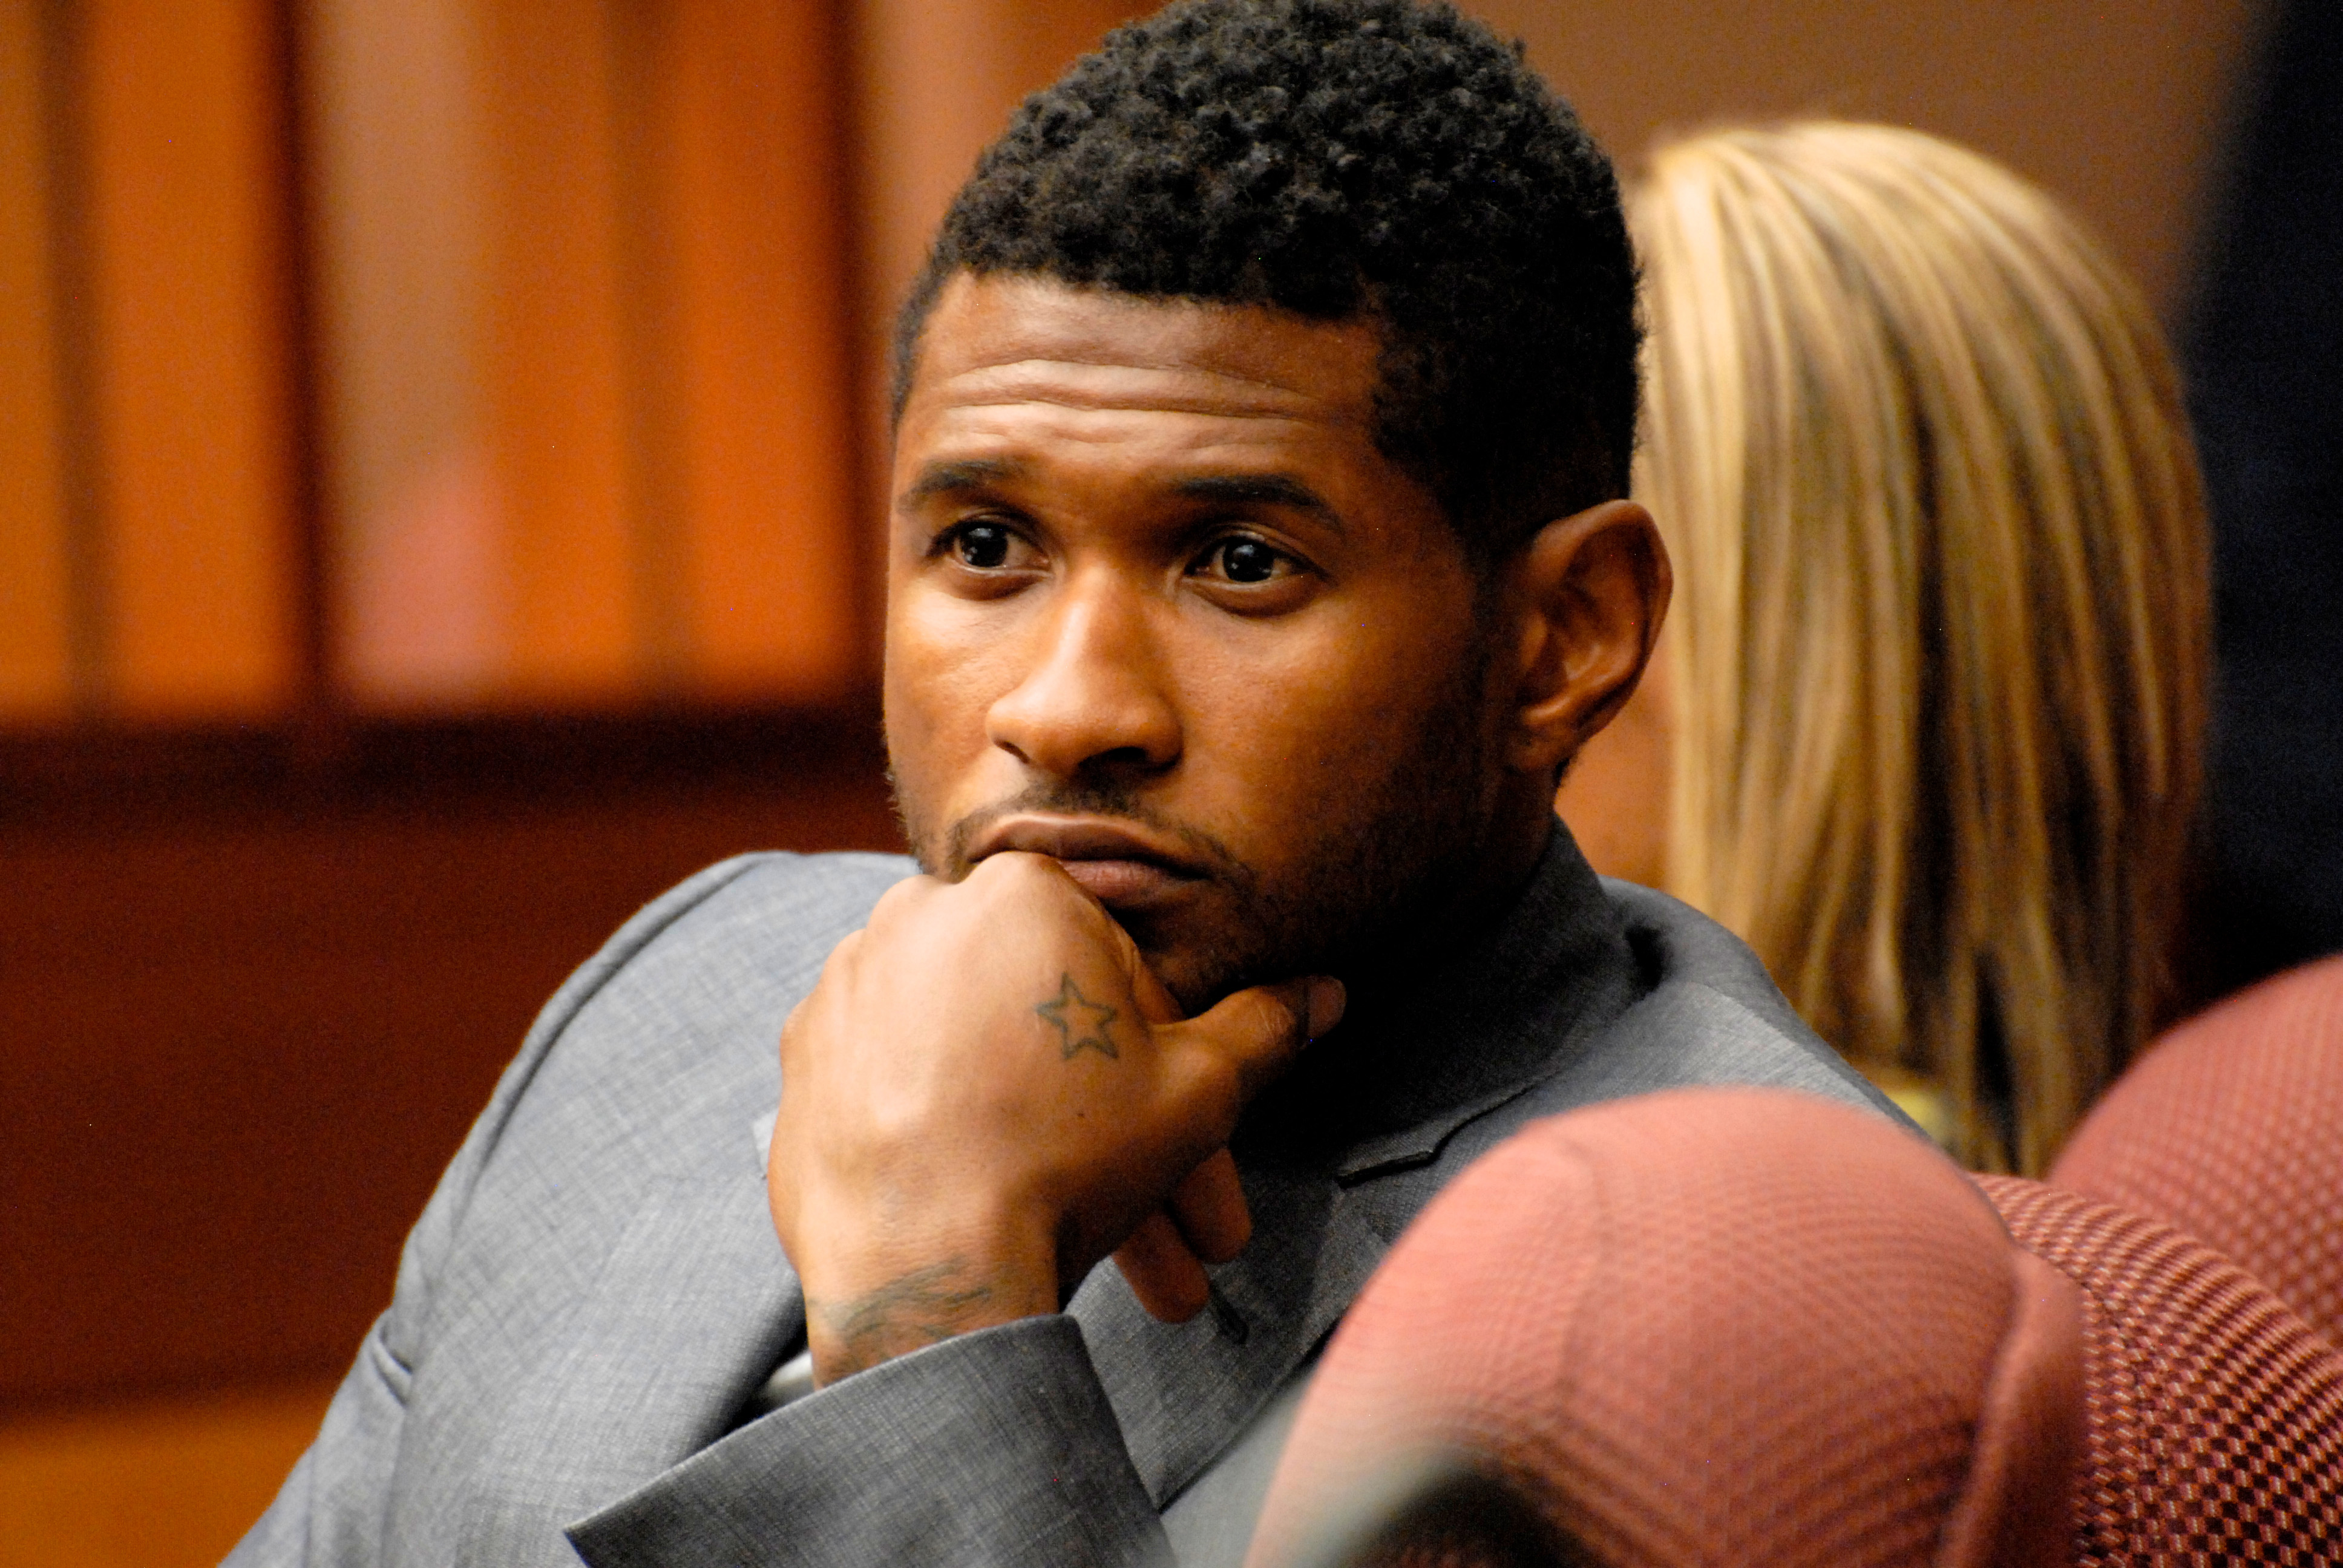 Usher Raymond attends a hearing to discuss child custody with his ex-wife Tameka Foster at Fulton County State Court on August 16, 2012 in Atlanta, Georgia. (John E. Davidson&mdash;Getty Images)